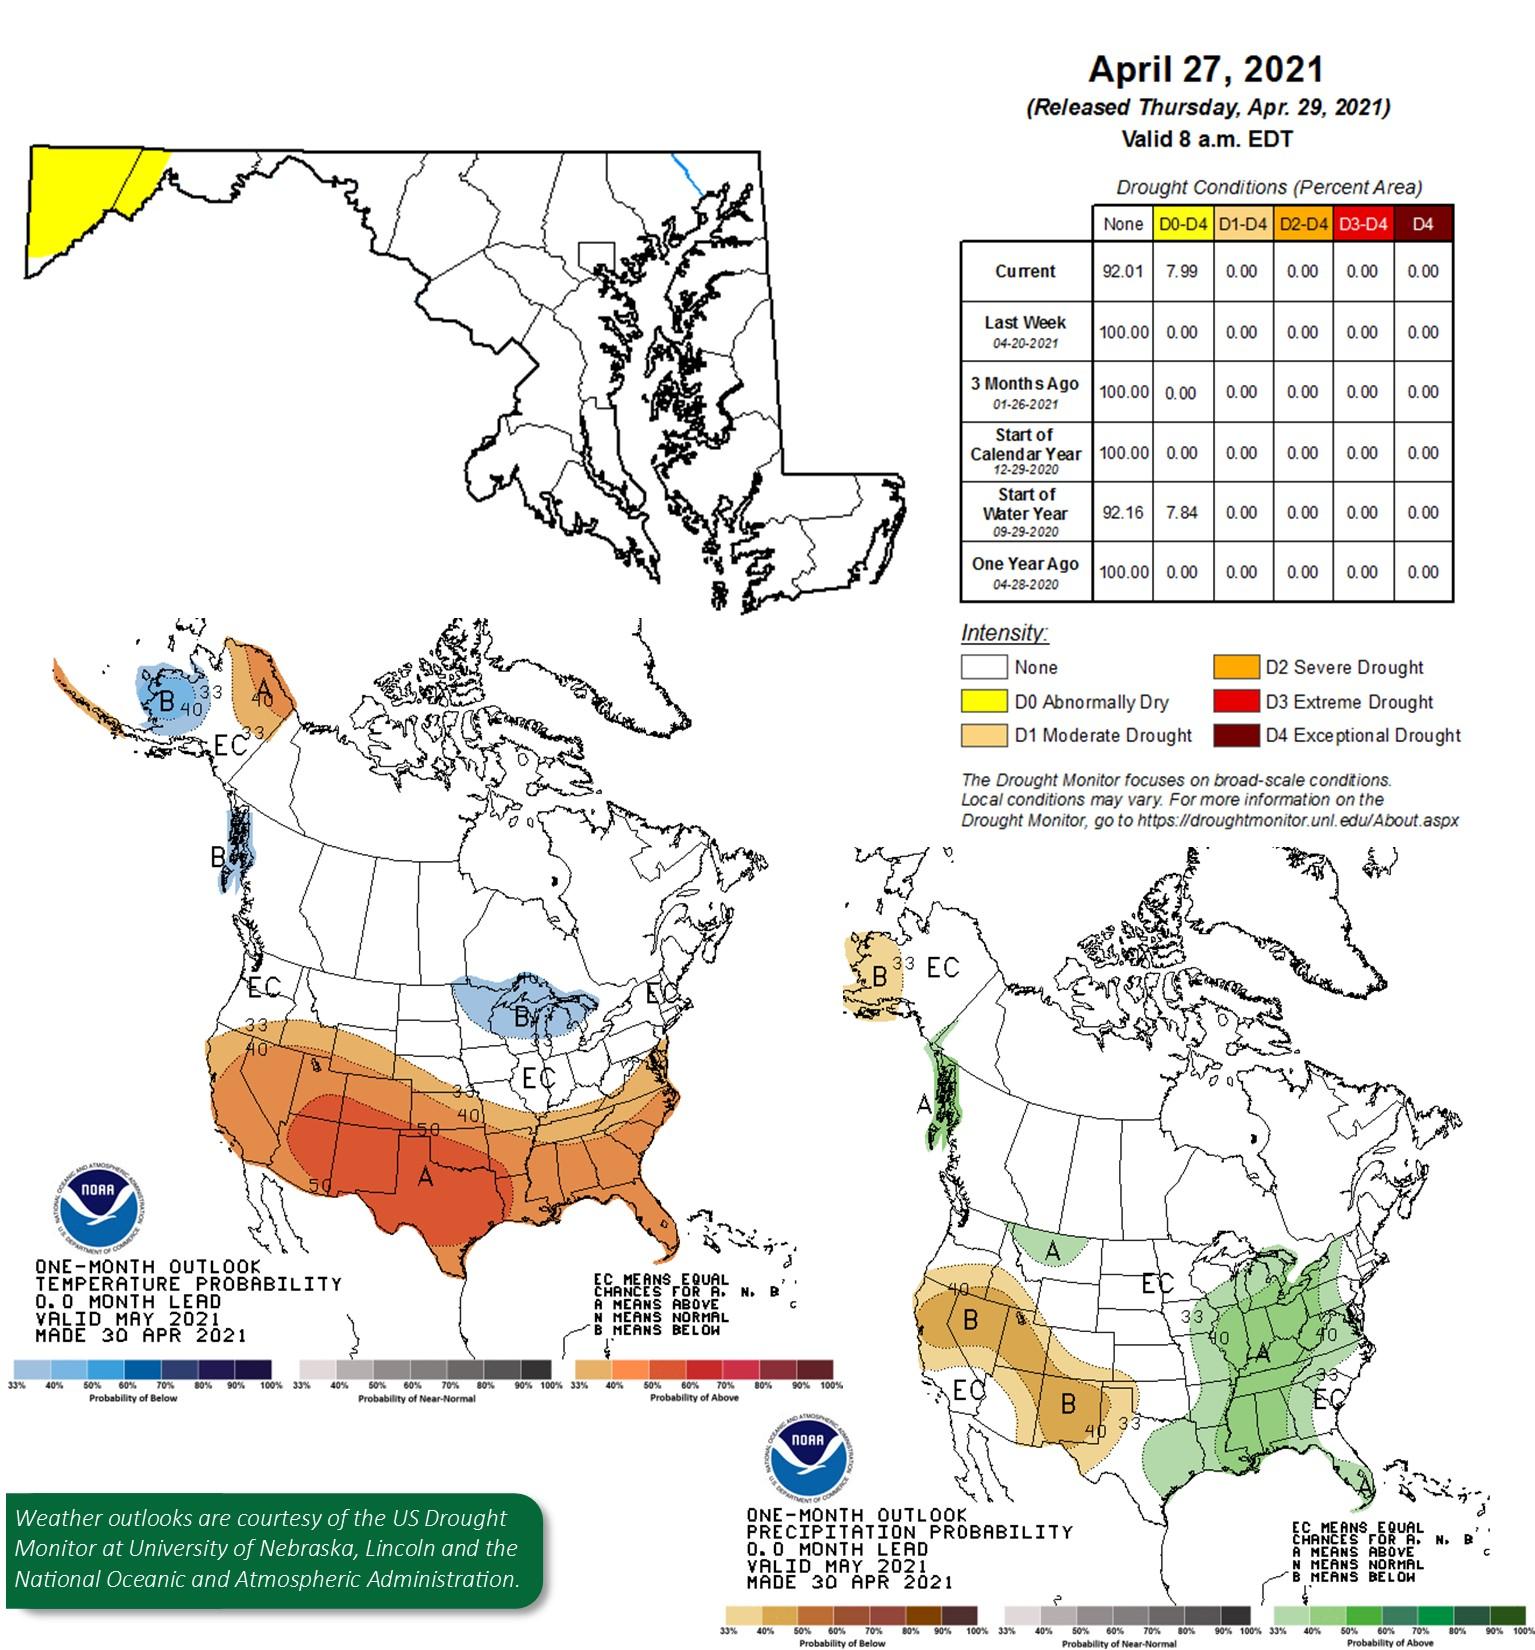 Drought Conditions Chart for April 27, 2021